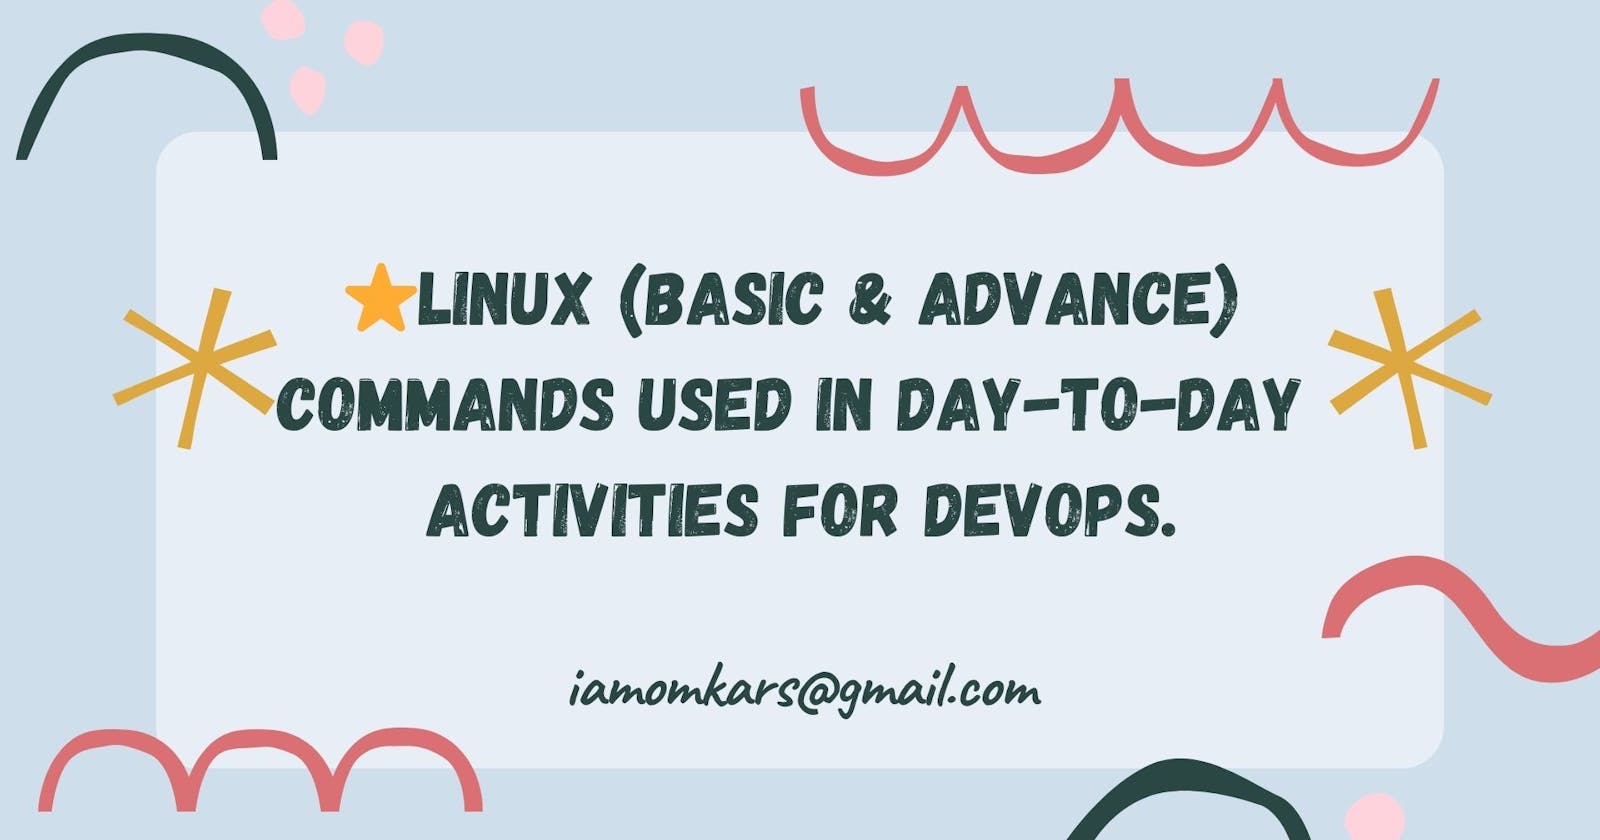 ⭐Day 6- Linux (Basic & Advance) commands used in day-to-day activities for DevOps.